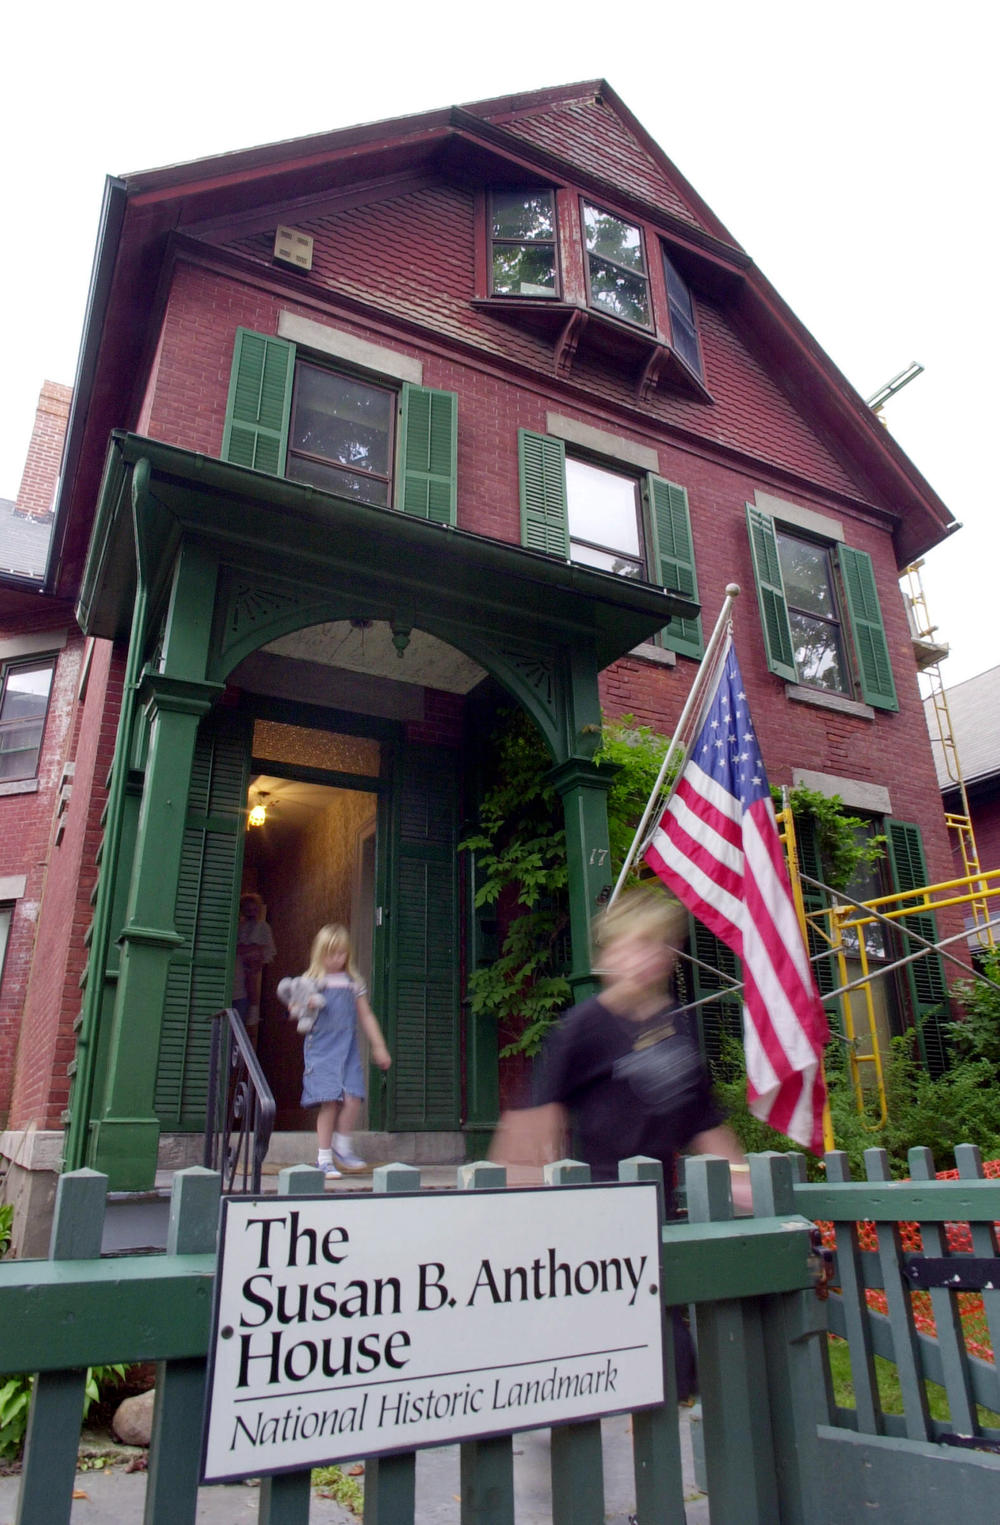 In this July 28, 2004, file photo, tourists exit the Susan B. Anthony House after taking a tour of the house in Rochester, N.Y. Fire officials in Rochester were investigating a fire that damaged the house early Sunday, Sept. 26, 2021.